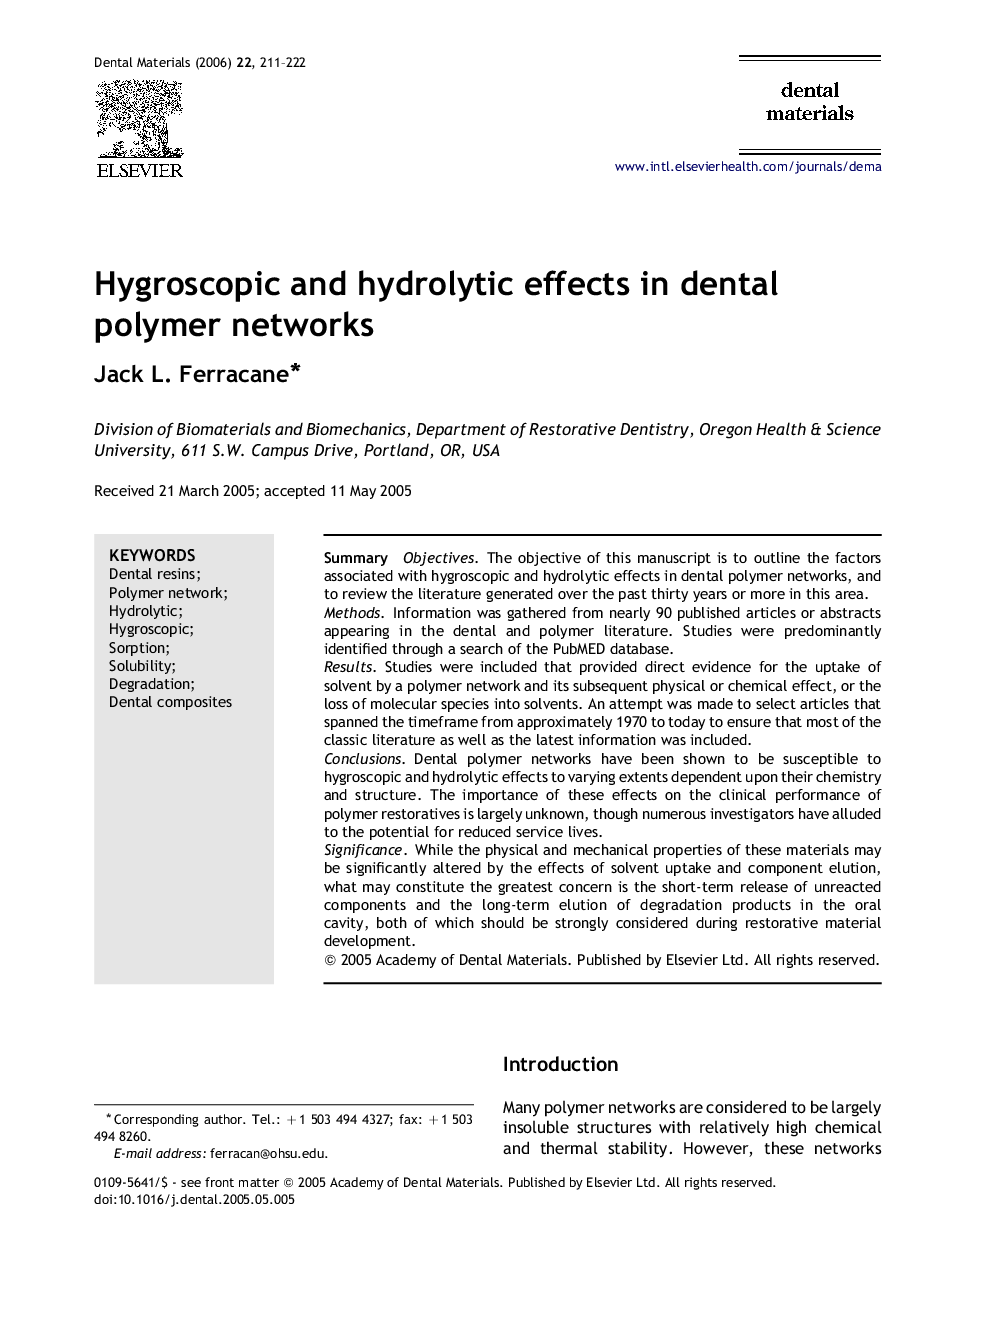 Hygroscopic and hydrolytic effects in dental polymer networks